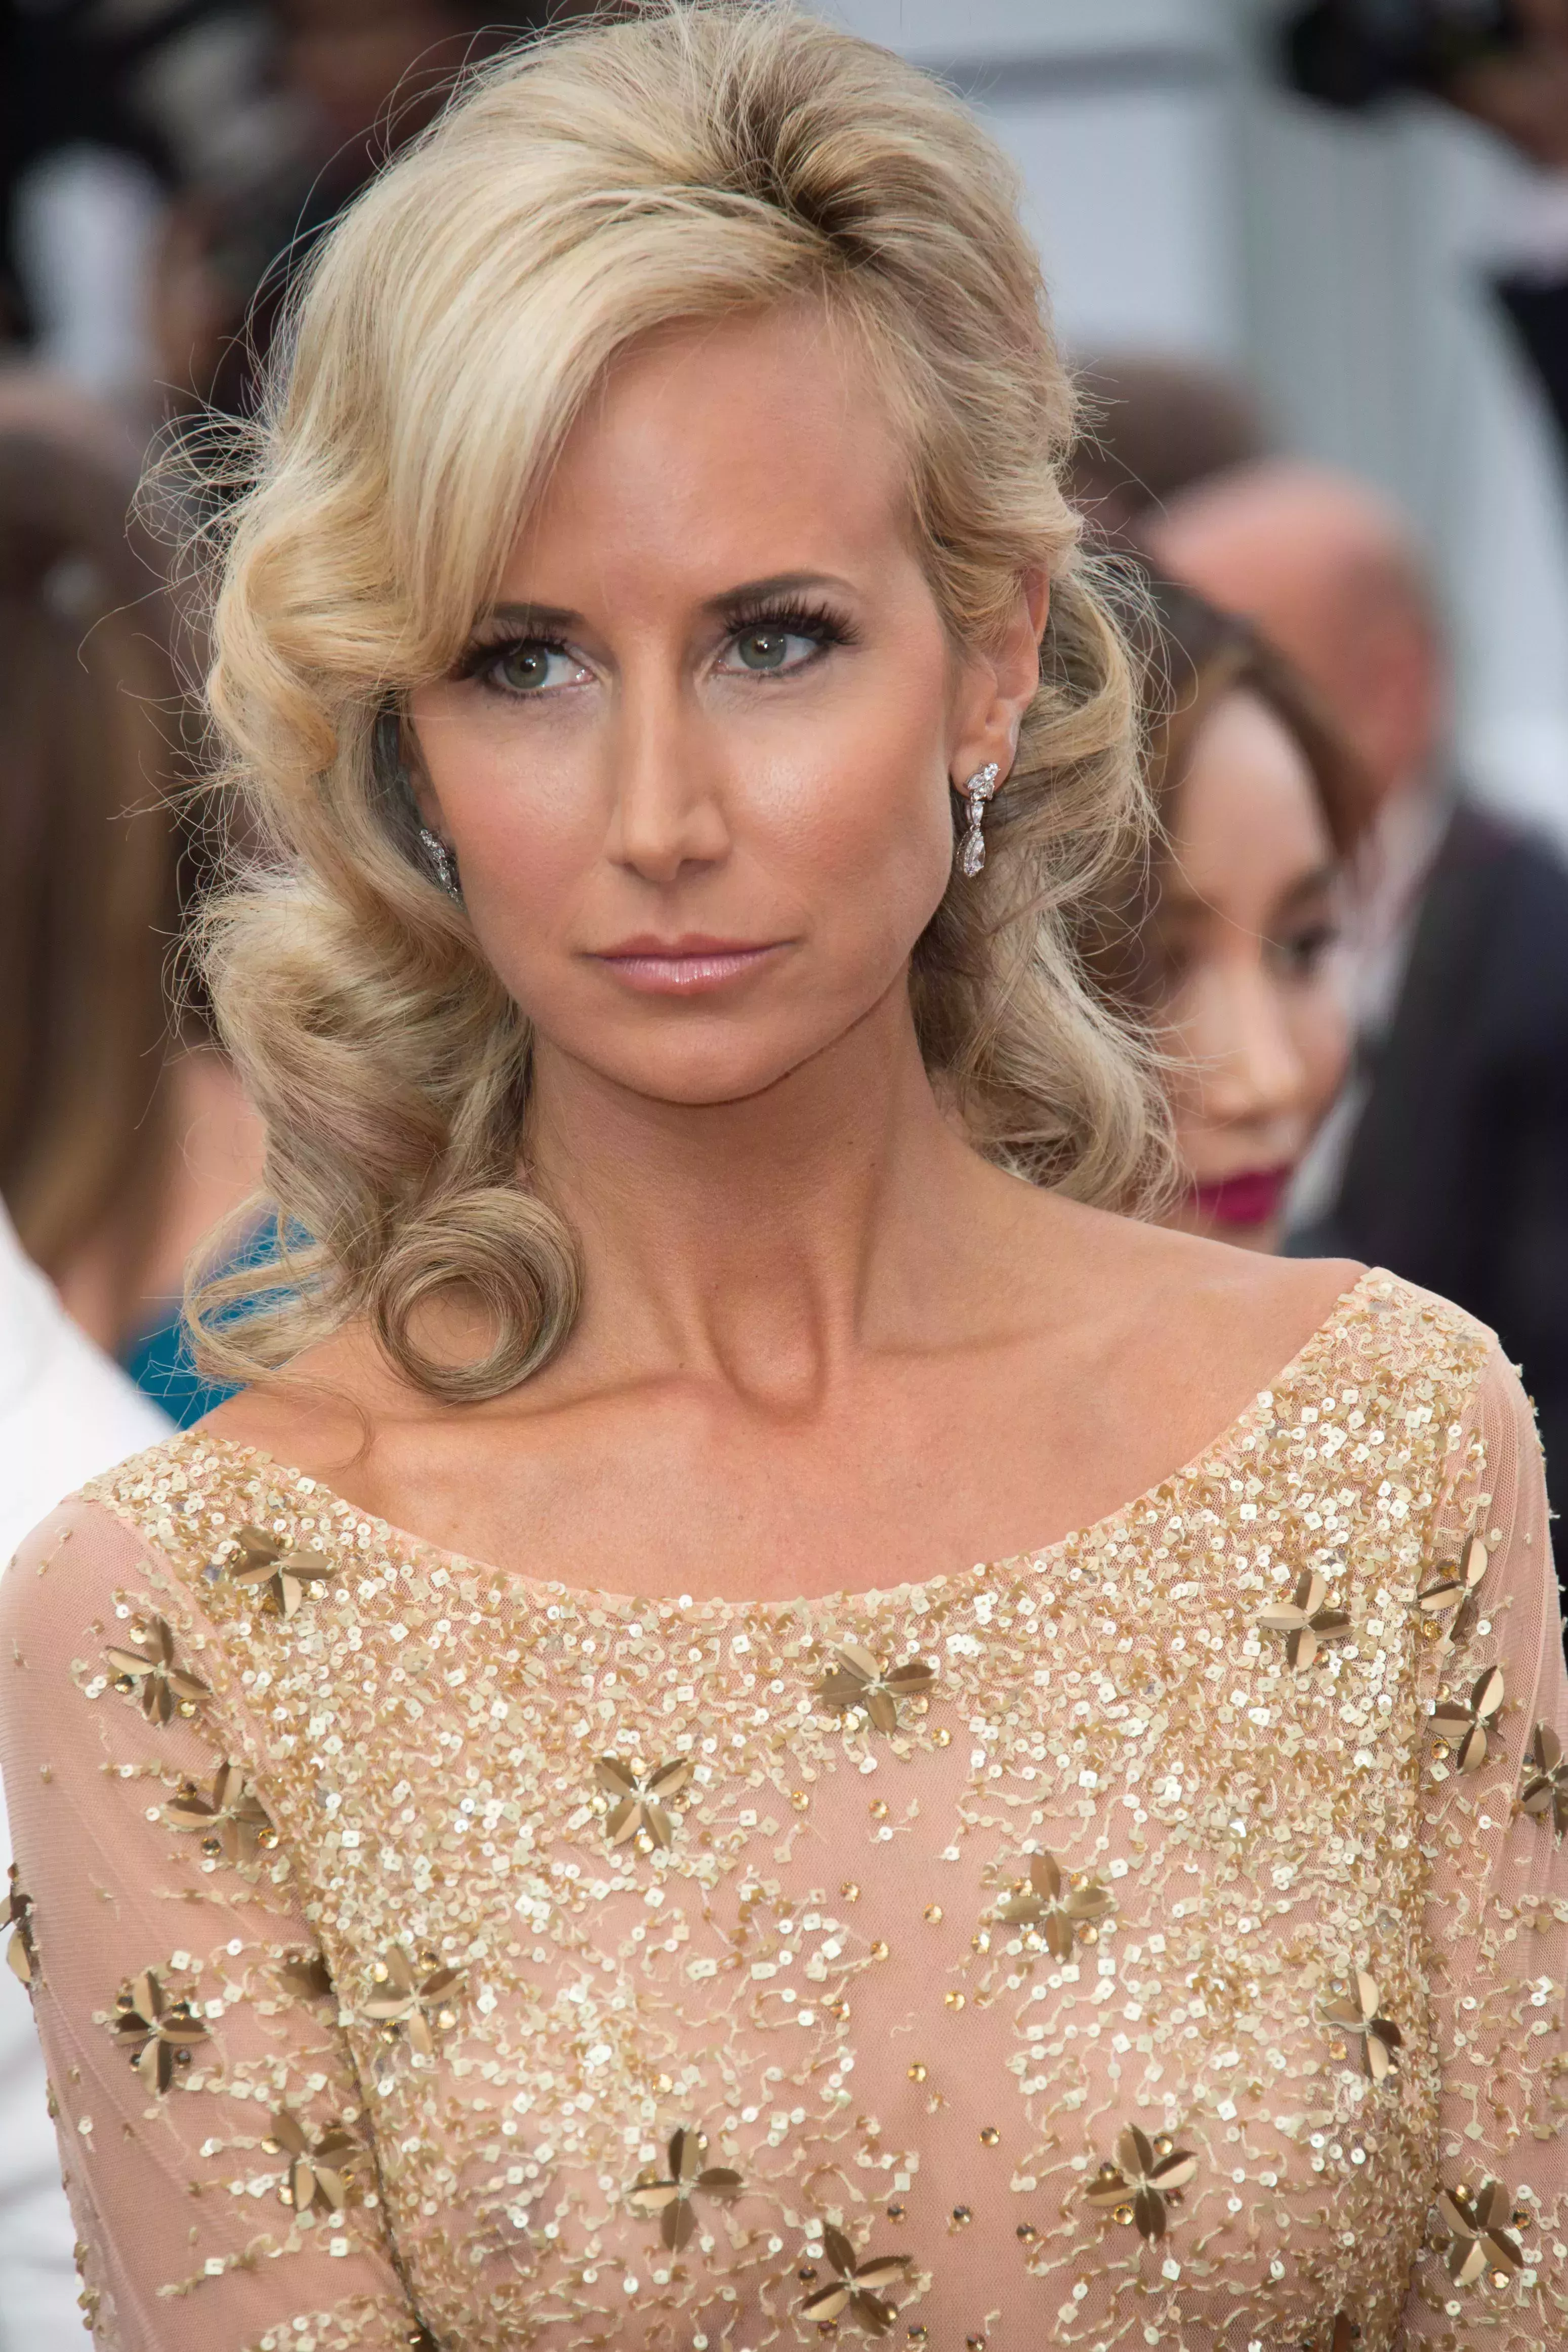 Lady Victoria Hervey with that Thick Hair Curly Shag